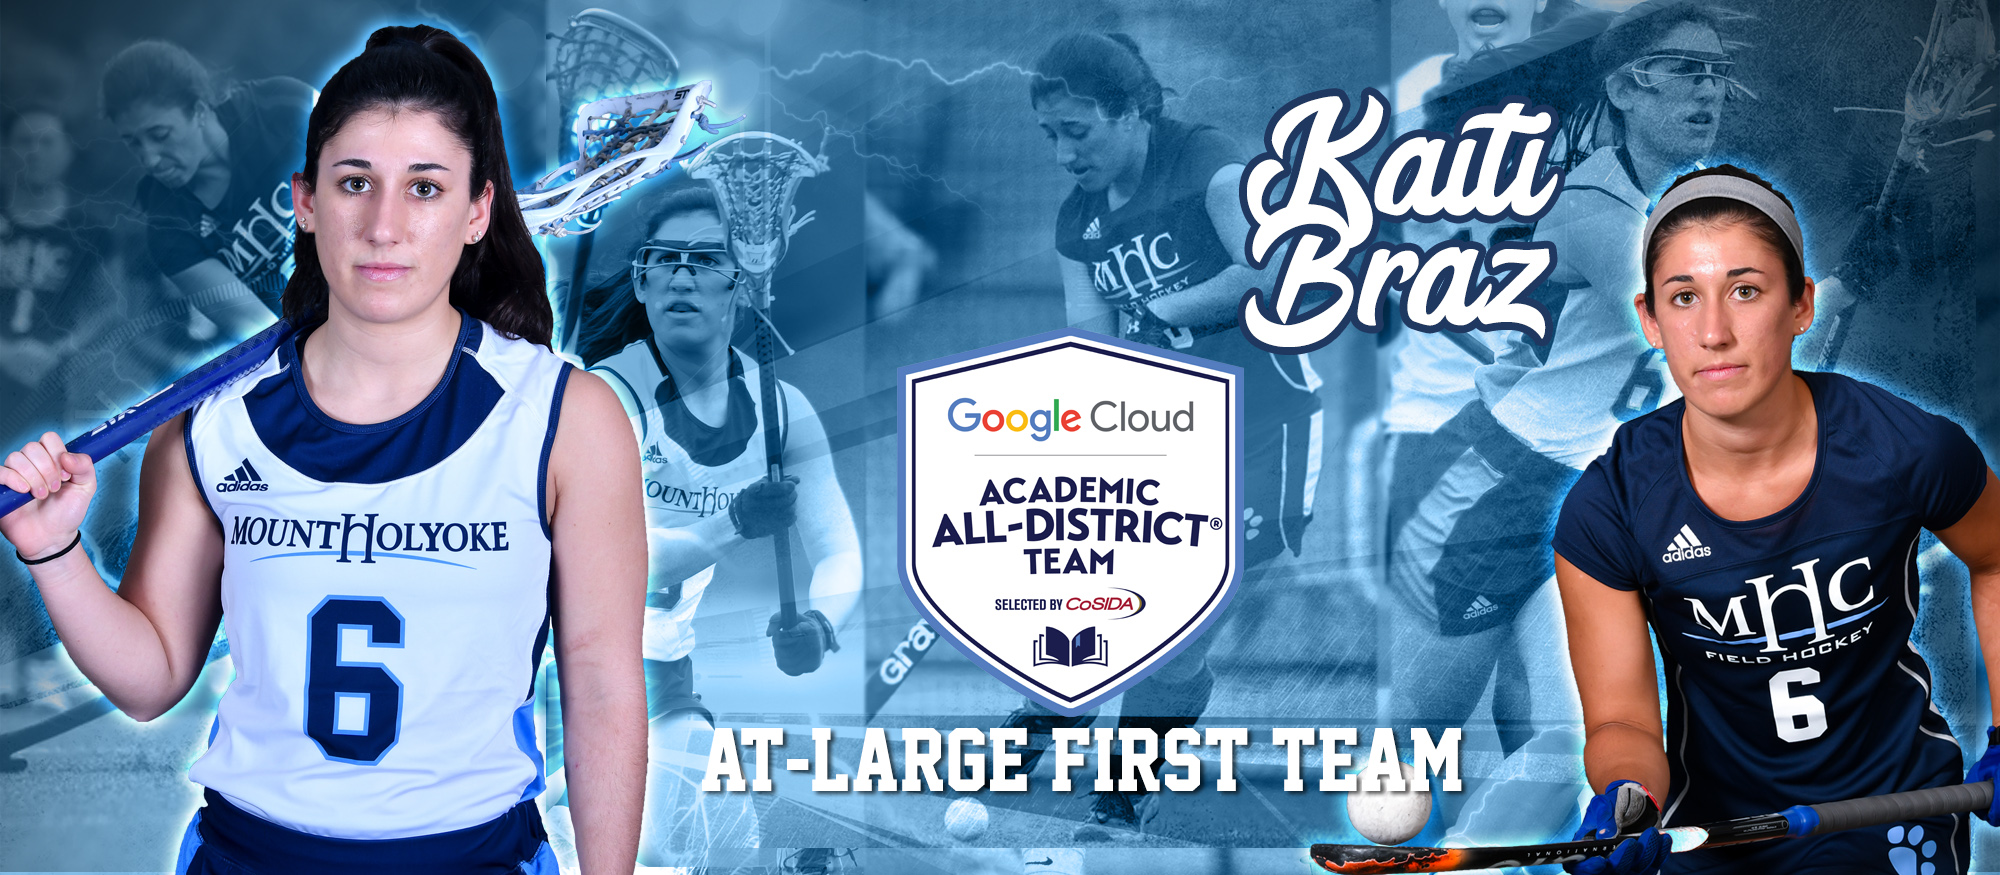 Graphic featuring Kaitlin Braz '18, who was named to the 2018 Google Cloud Academic All-District At-Large First Team in May 2018.